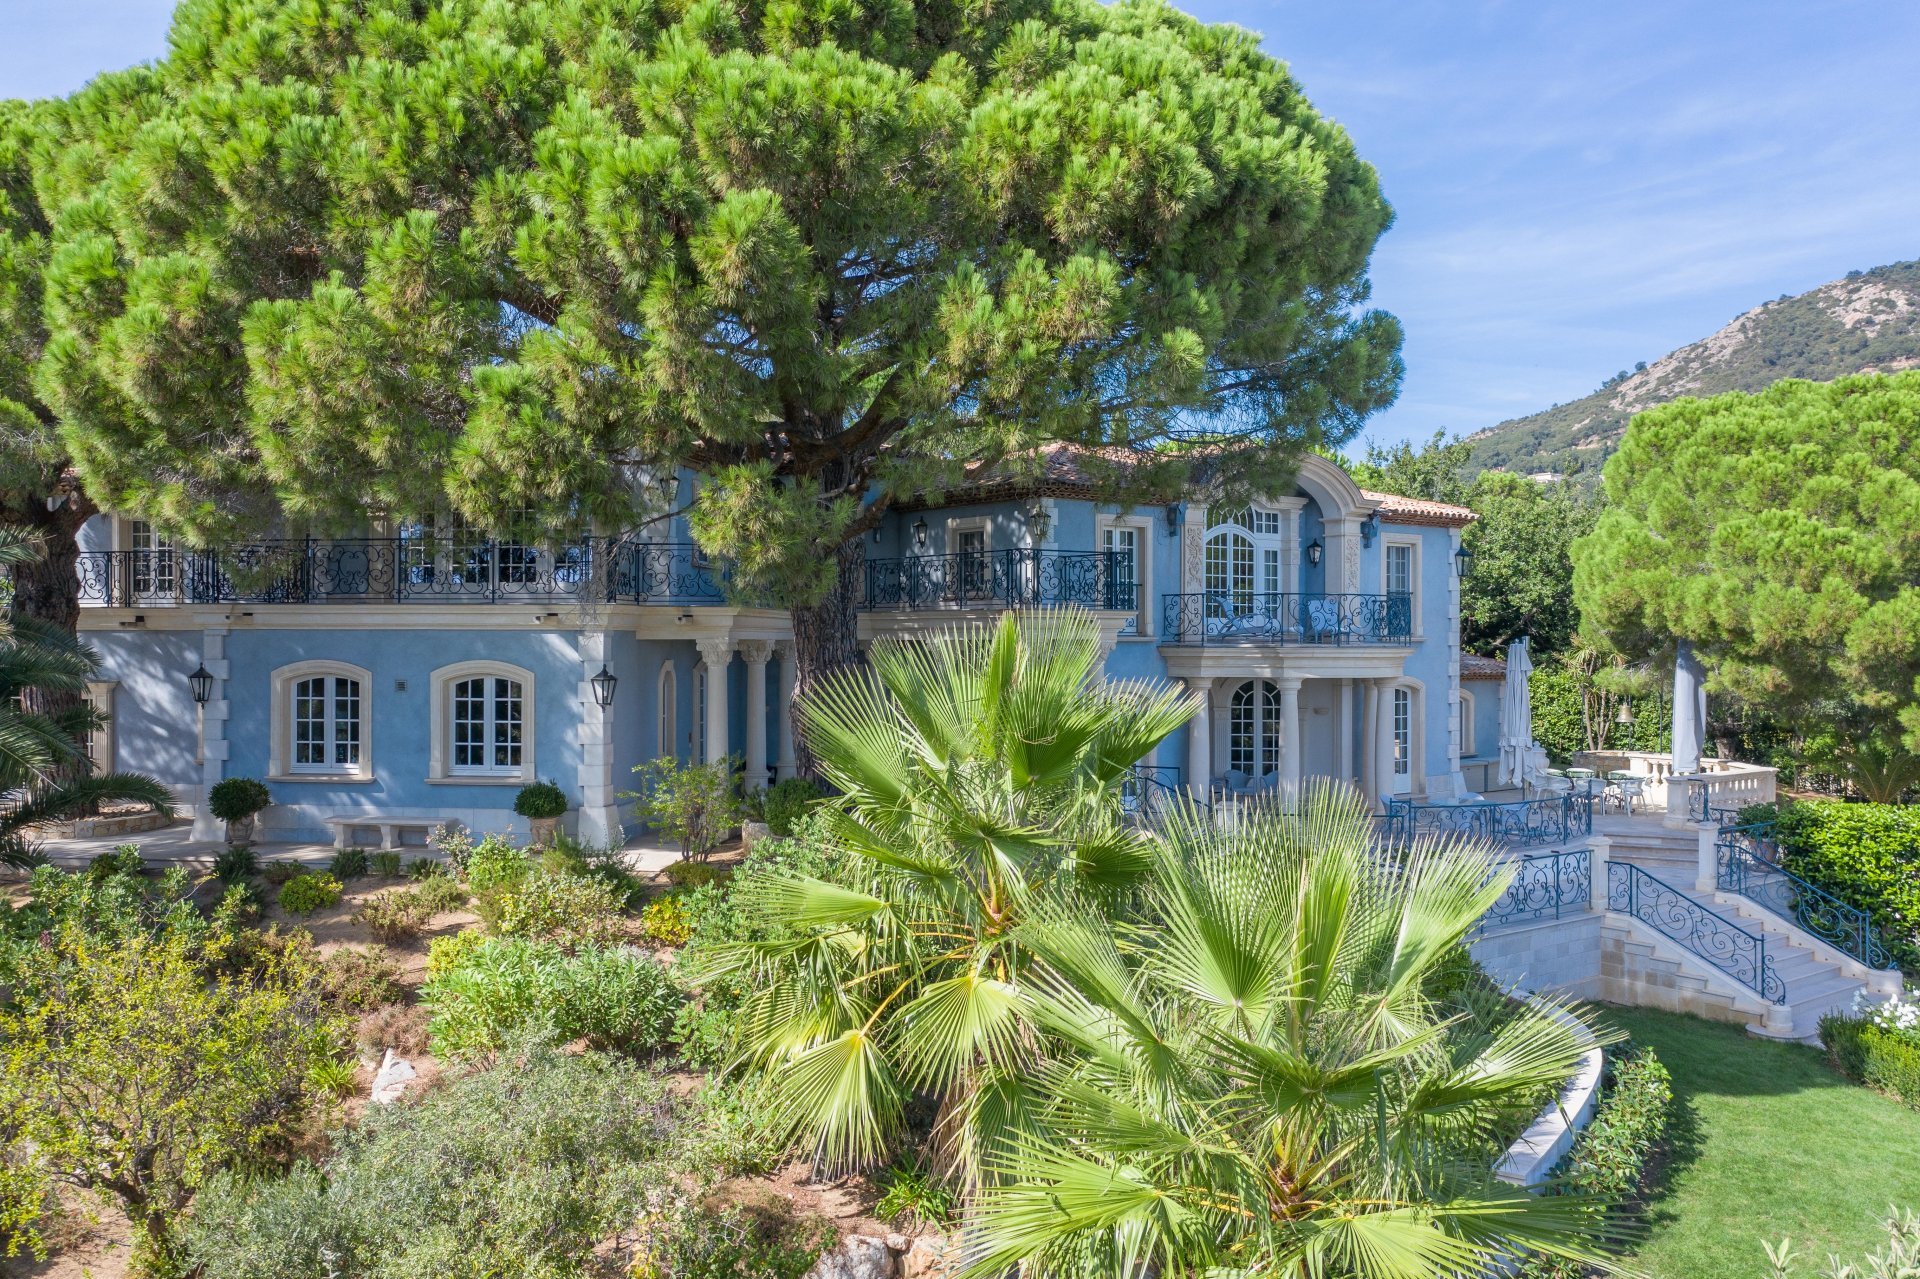 Francis York Iconic French Riviera Villa Overlooking the Bay of Saint Tropez 6.jpg